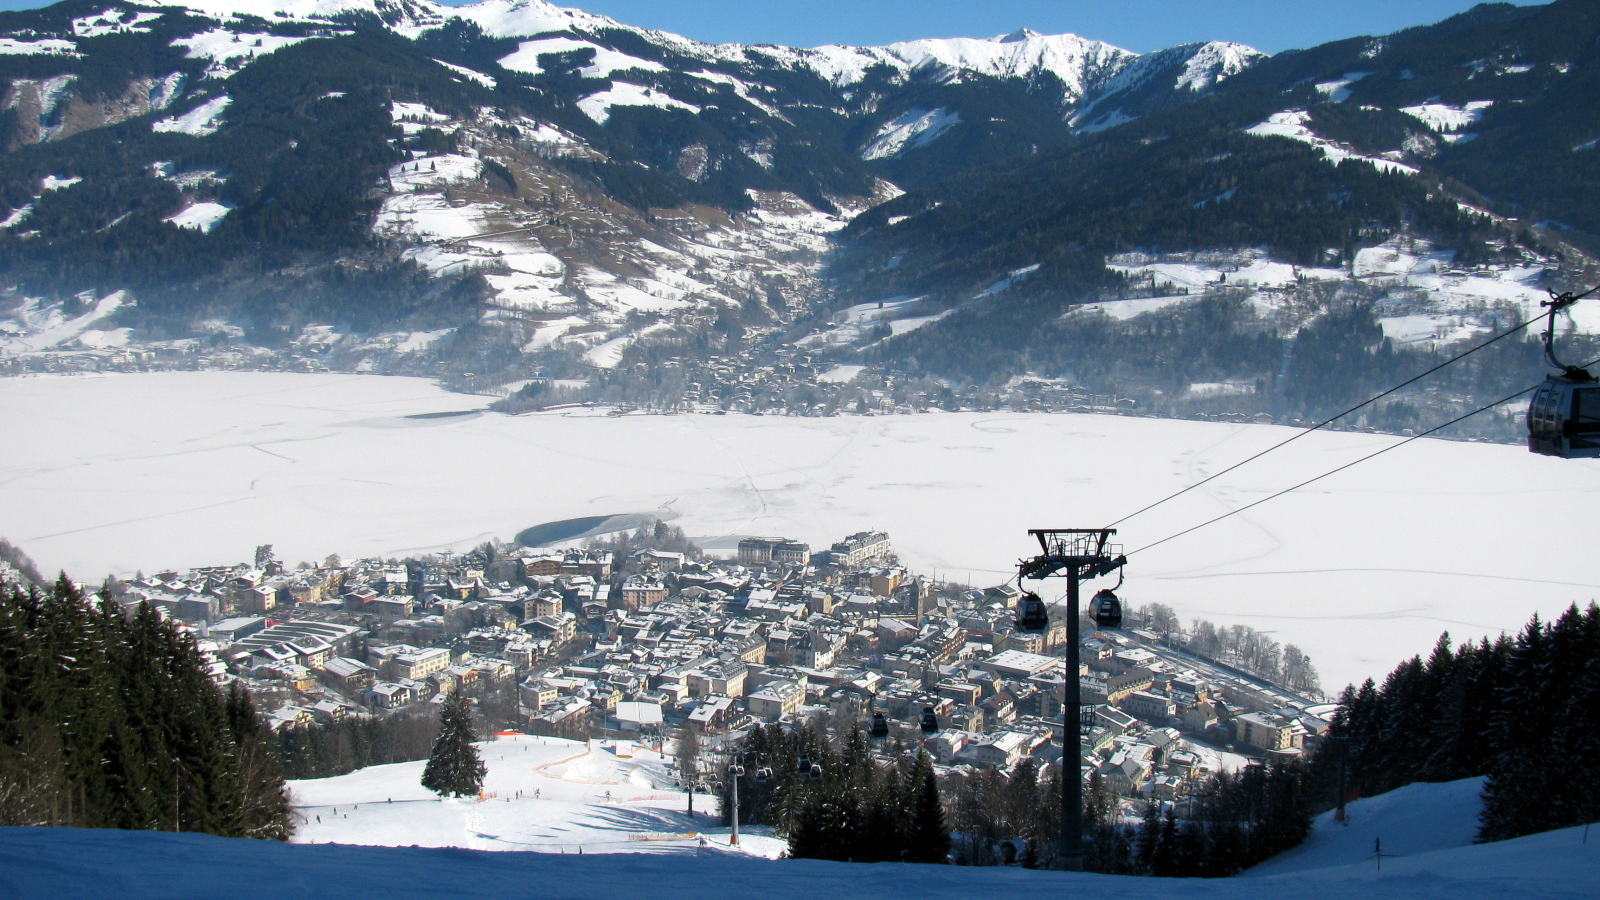 Panorama of the resort of Zell am See, Austria